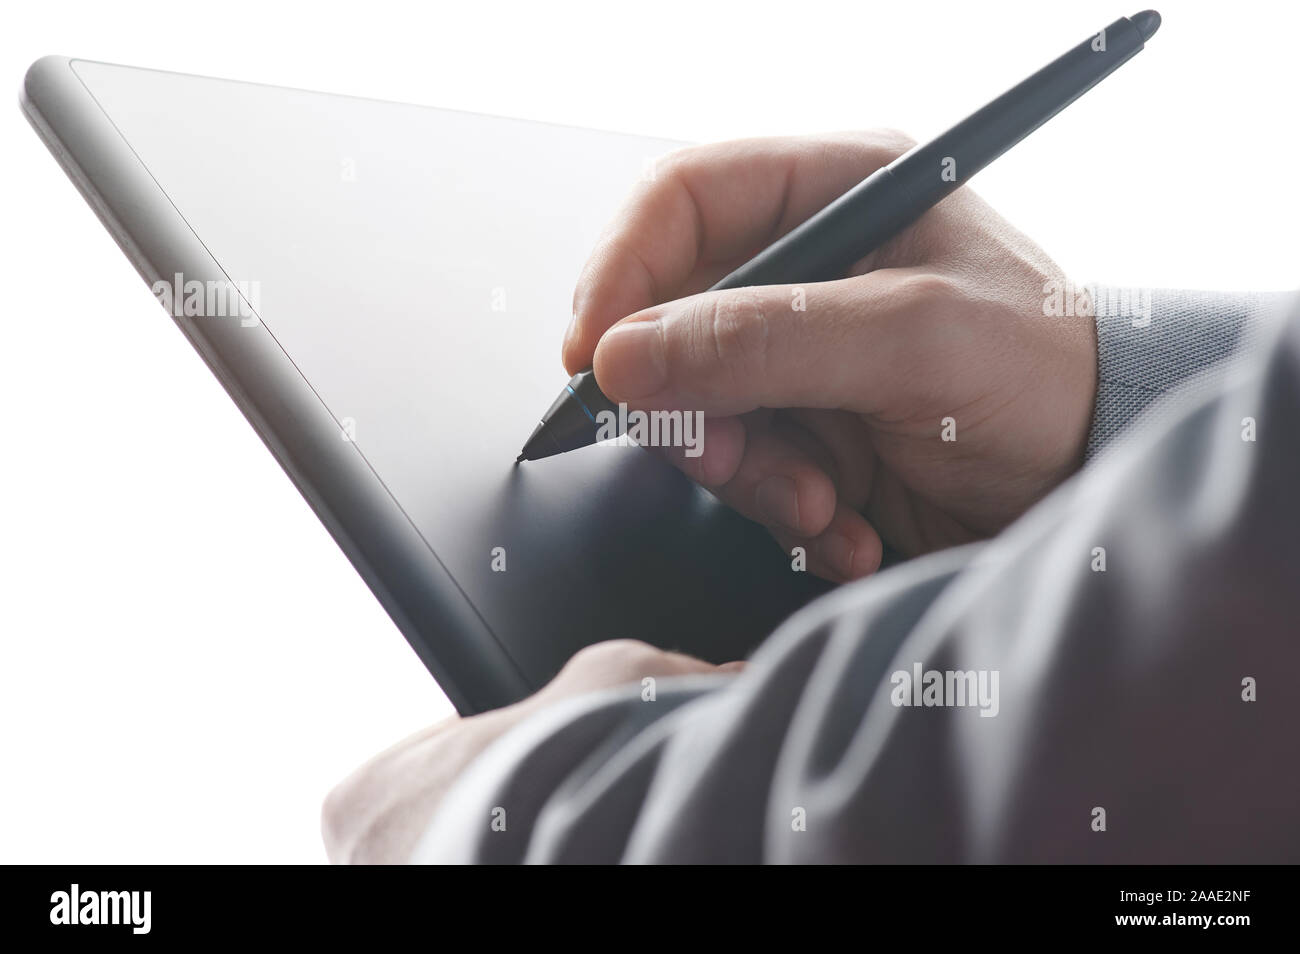 Putting electronical signature with tablet close up view Stock Photo